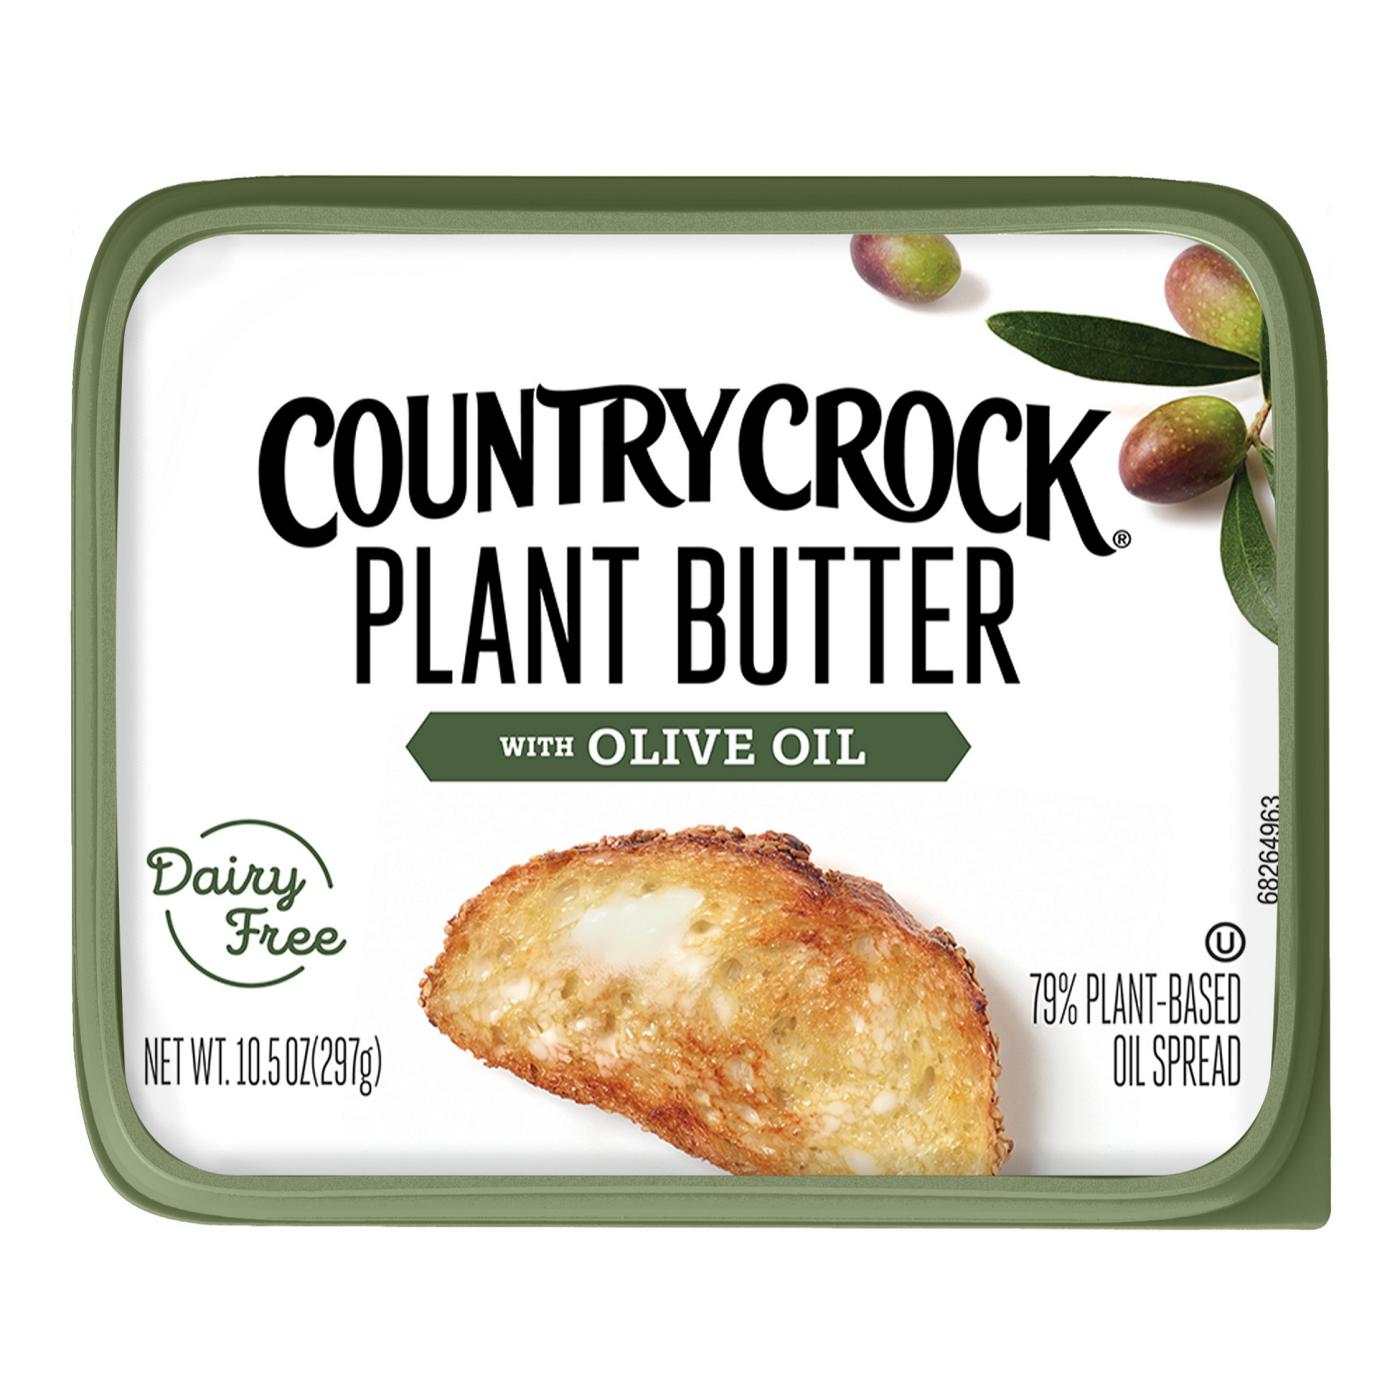 Country Crock Dairy Free Plant Butter with Olive Oil Spread; image 3 of 10